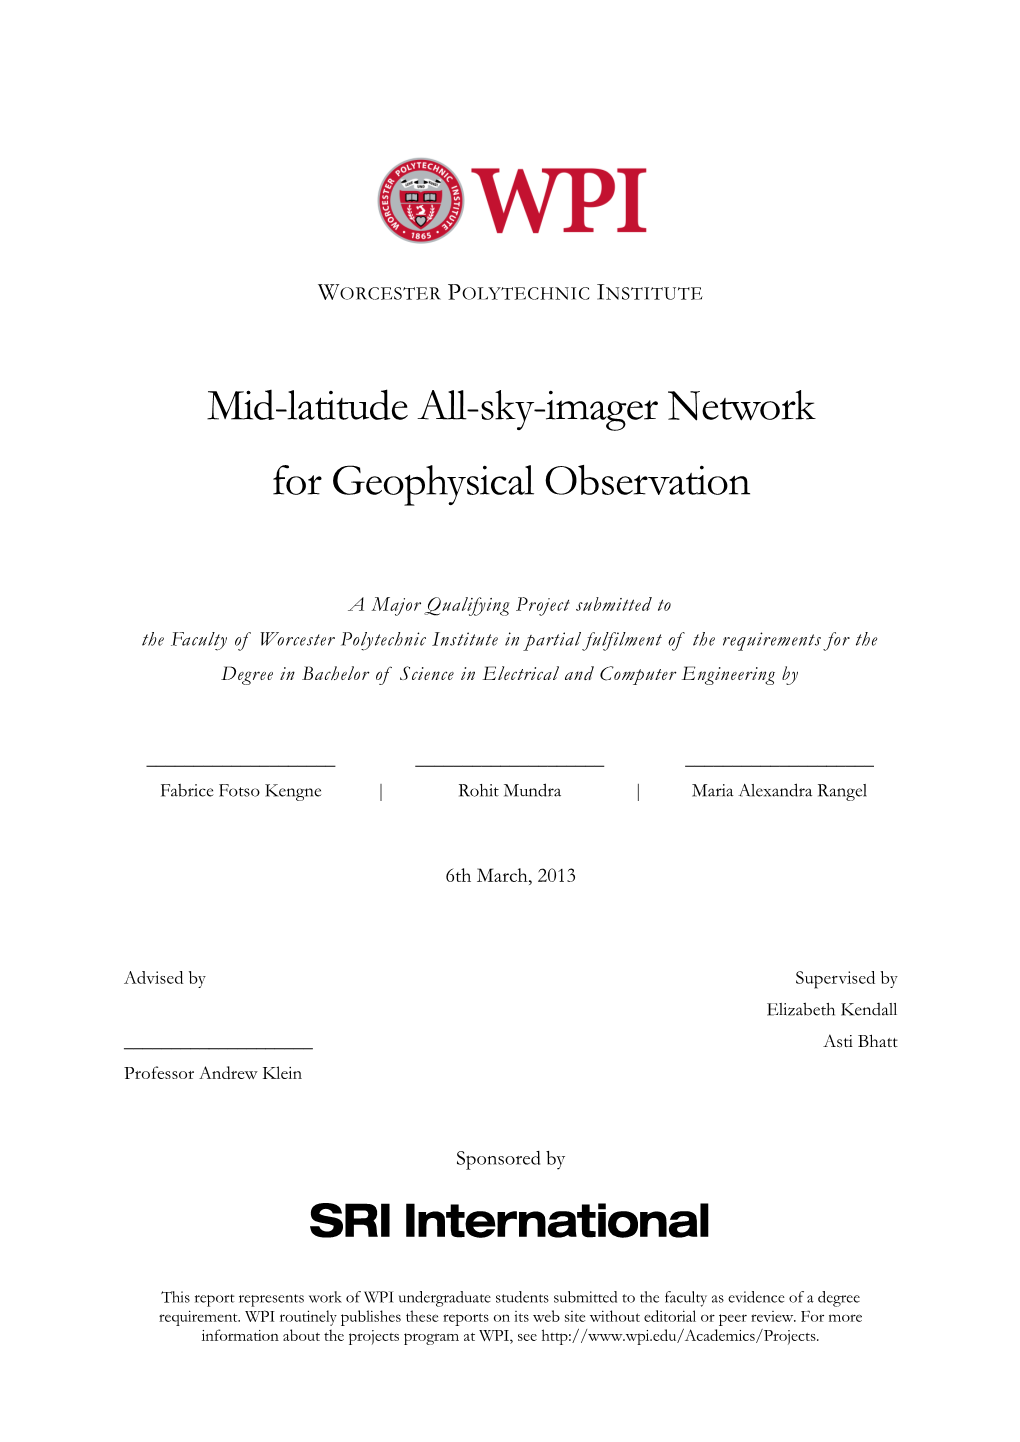 Mid-Latitude All-Sky-Imager Network for Geophysical Observation